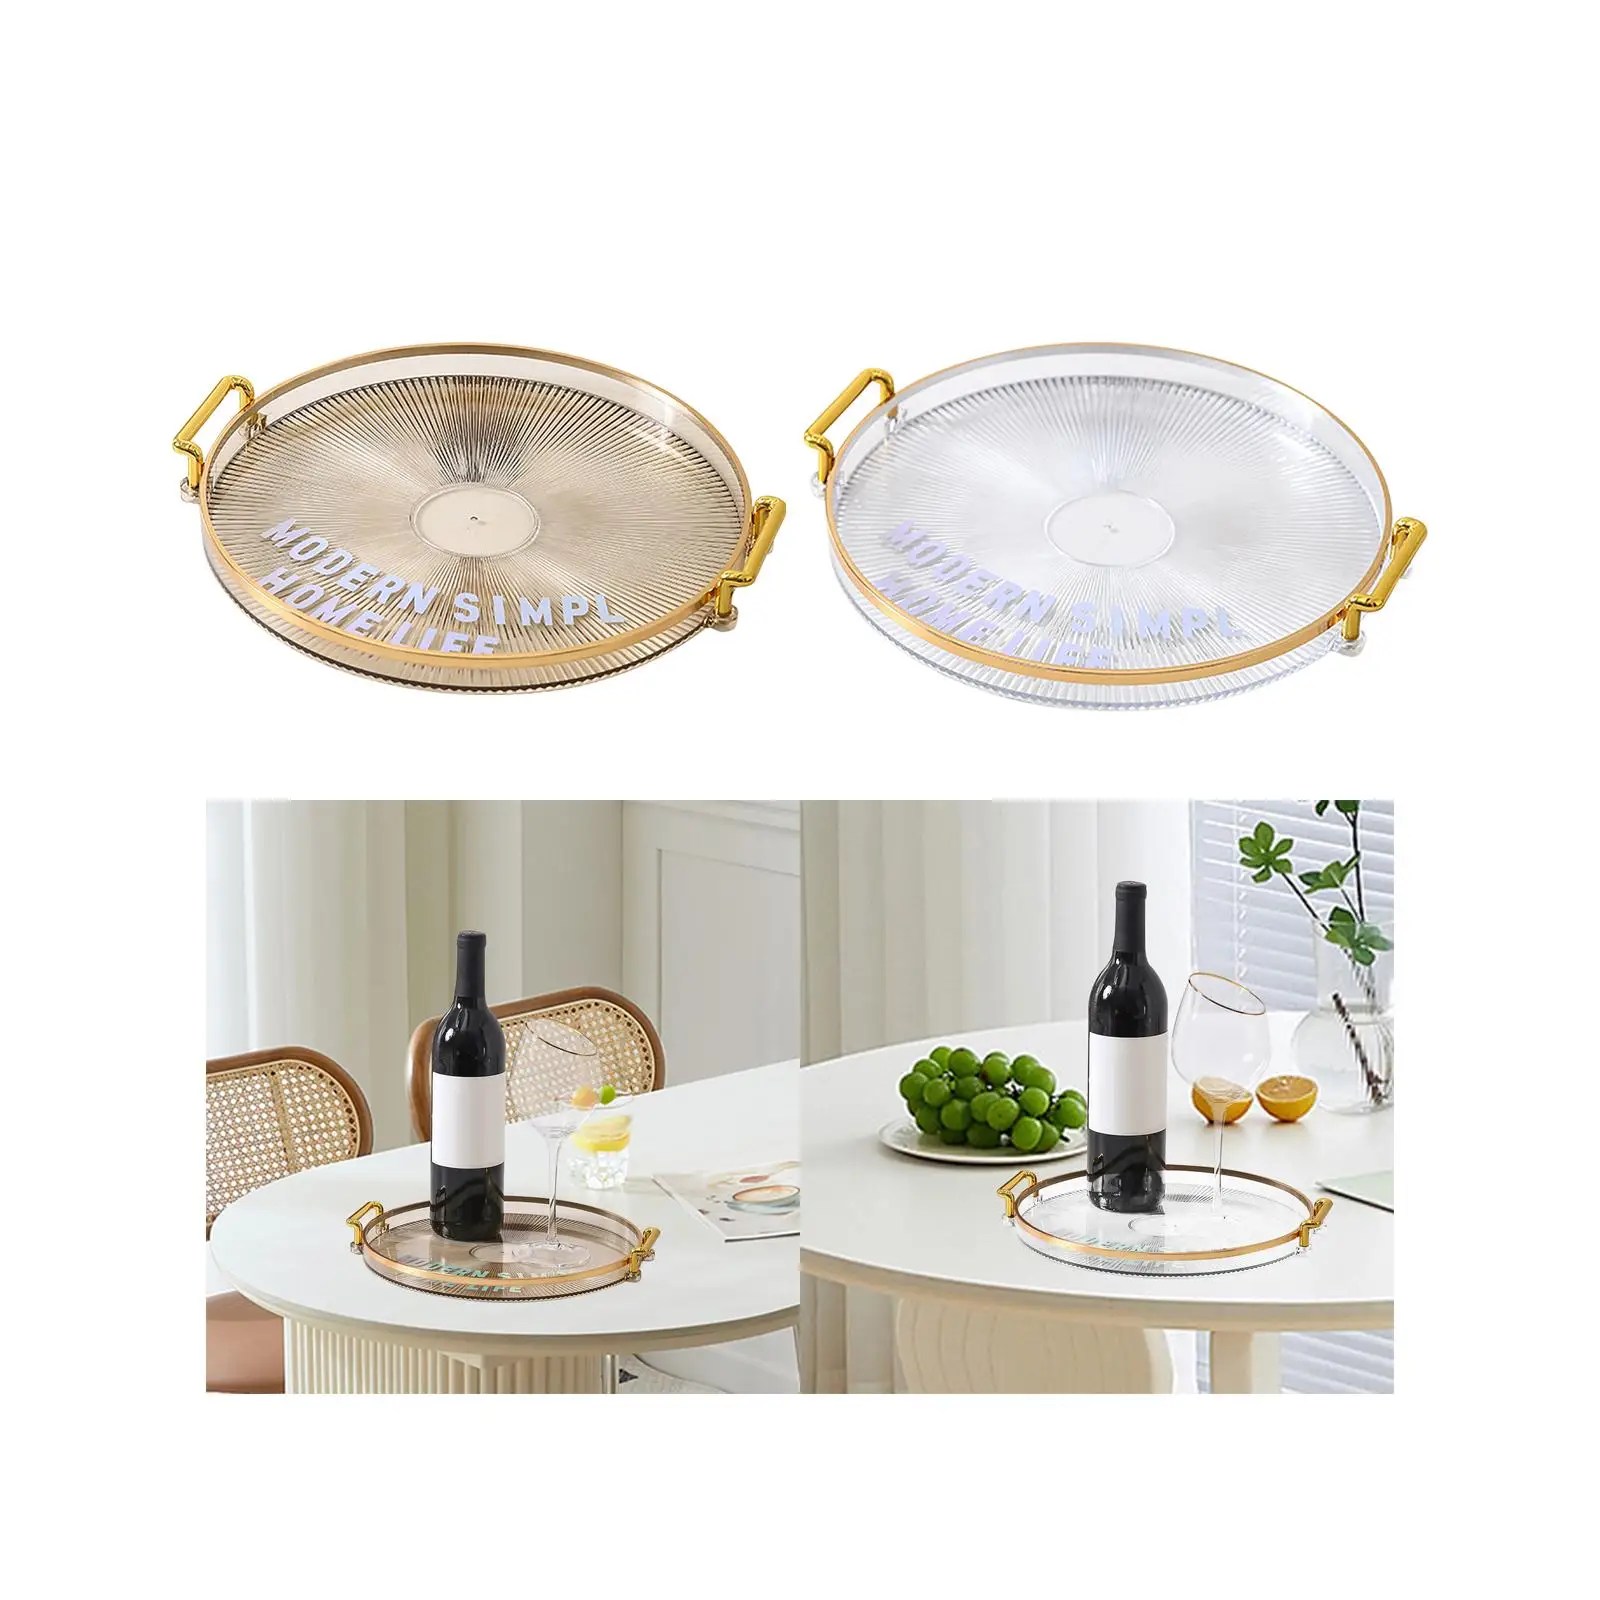 Multifunction Serving Tray with Handles Party Serving Platter Cake Stand for Pantry Table Centerpiece Dining Table Bathroom Home